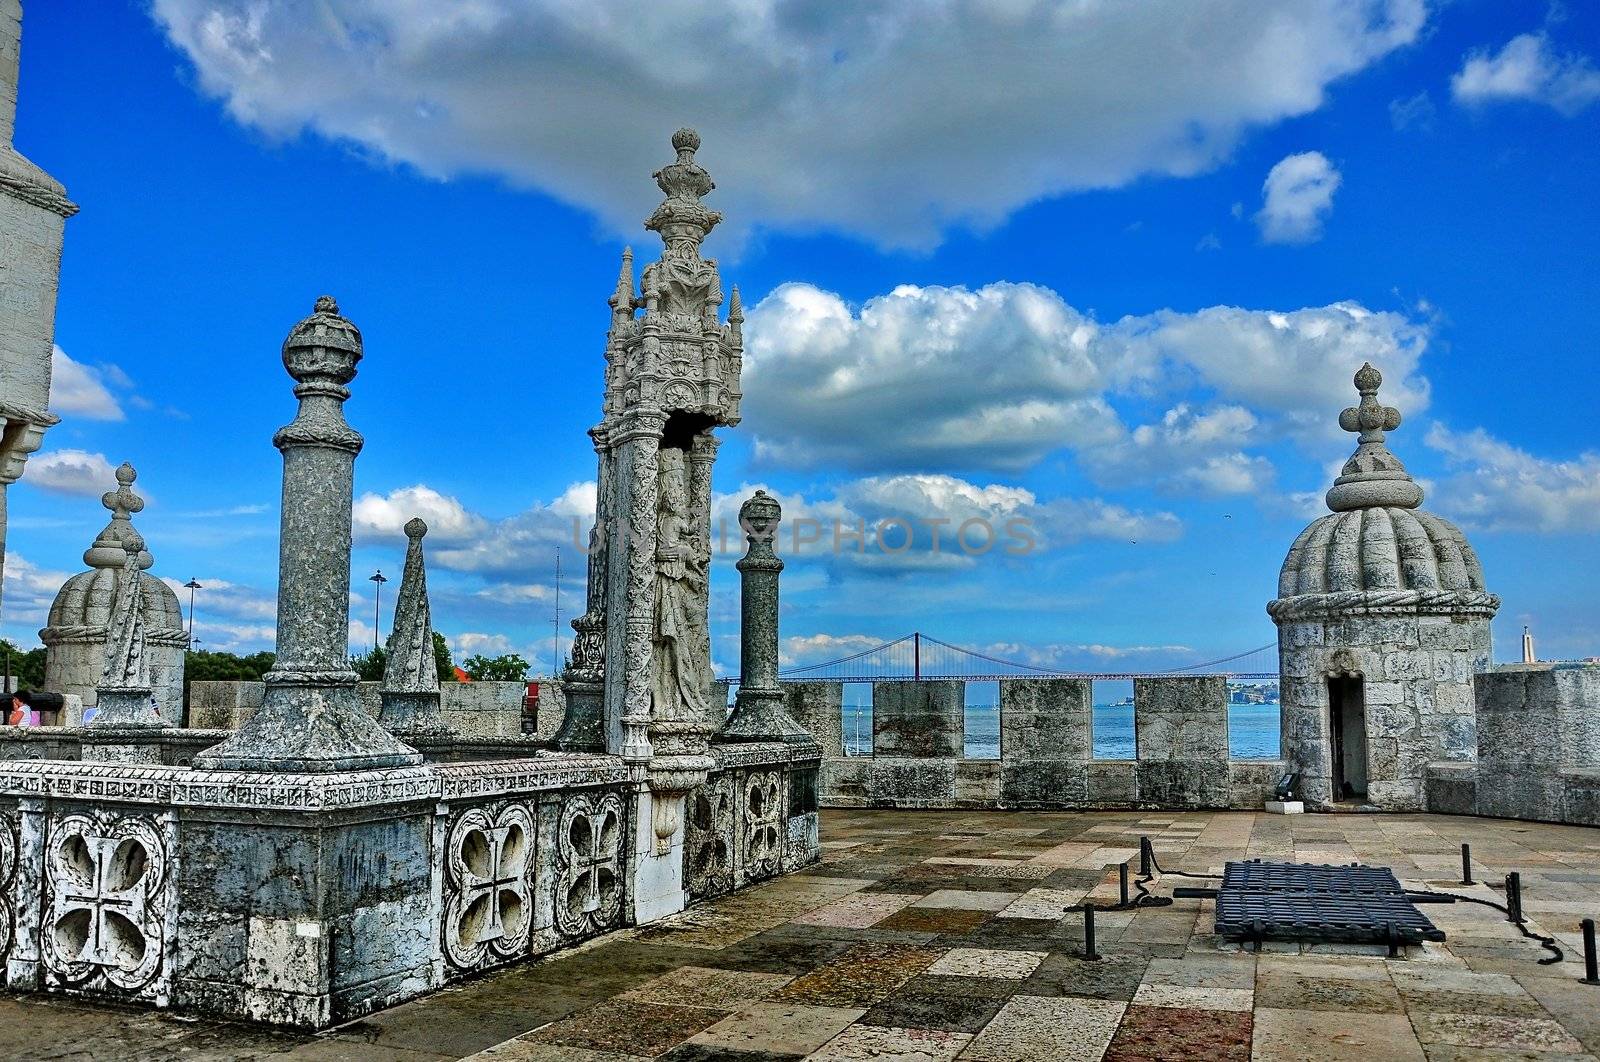 view of Belem Tower, one the most famous landmark in the city of Lisbon (Portugal)